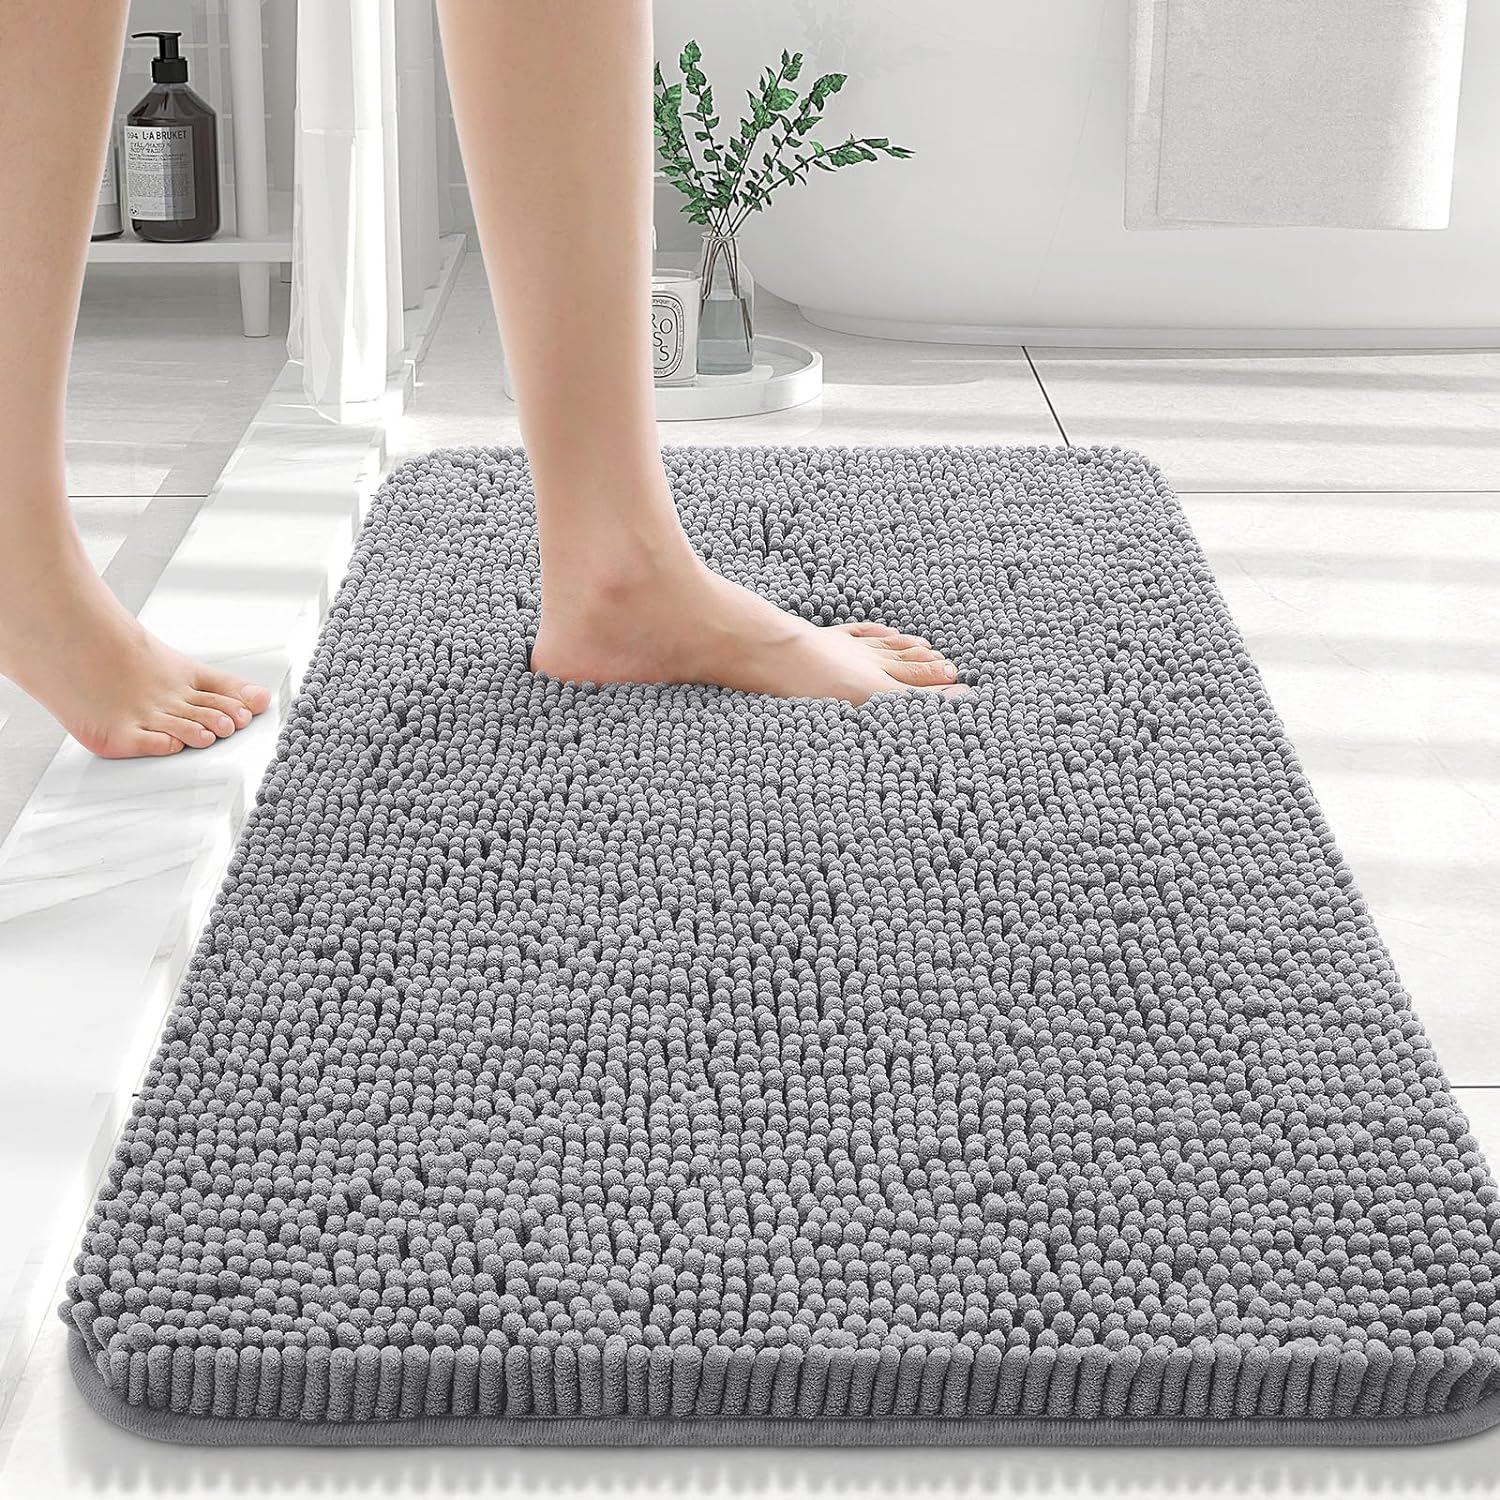 OLANLY Bathroom Rugs 30x20, Extra Soft Absorbent Chenille Bath Rugs, Non-Slip, Dry Quickly, Machine Washable, Bath Mats for Bathroom Floor, Tub and Shower, Grey $5.39